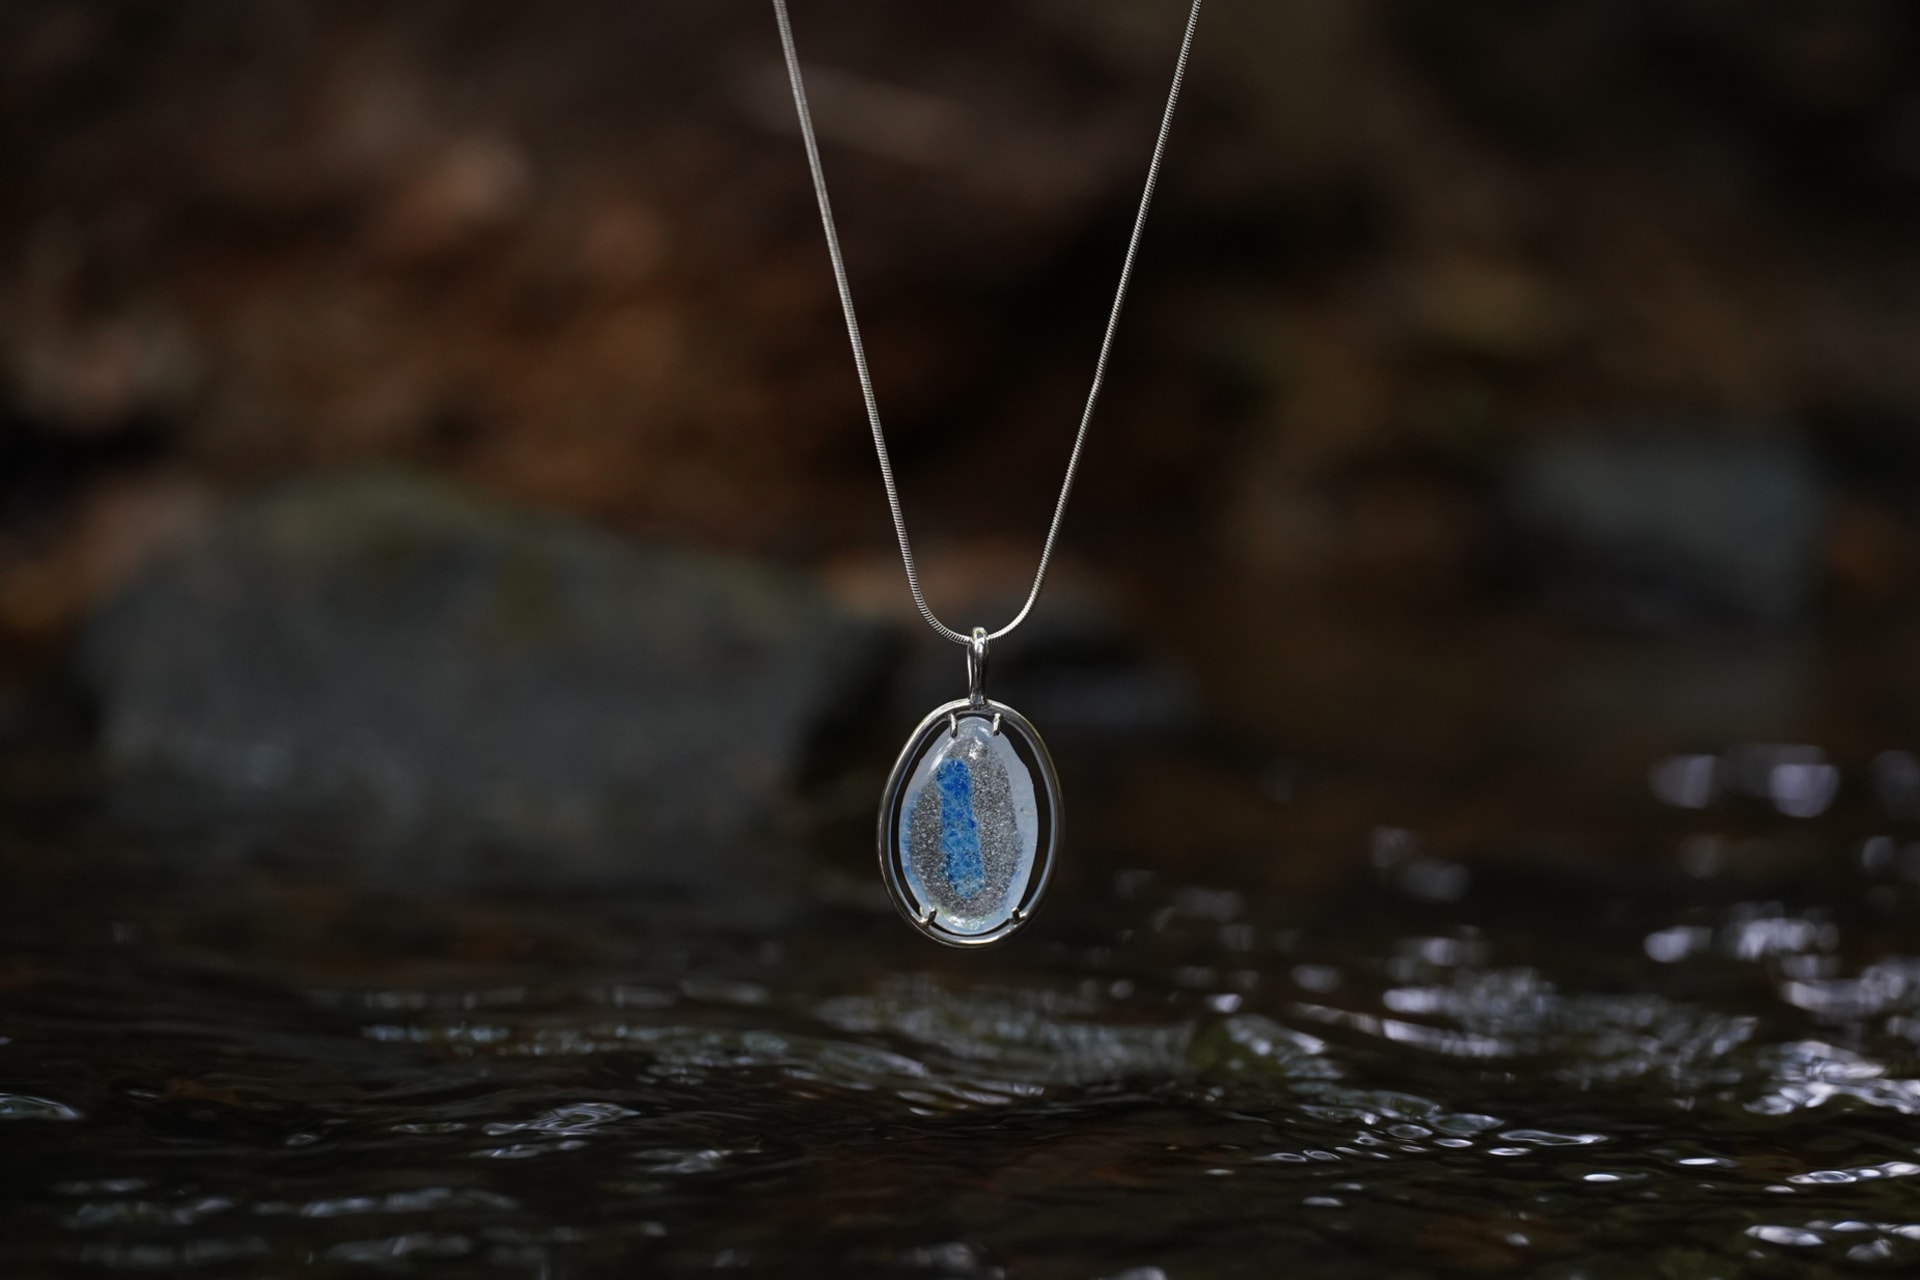 A glass pebble made with caddisfly and local crafters.